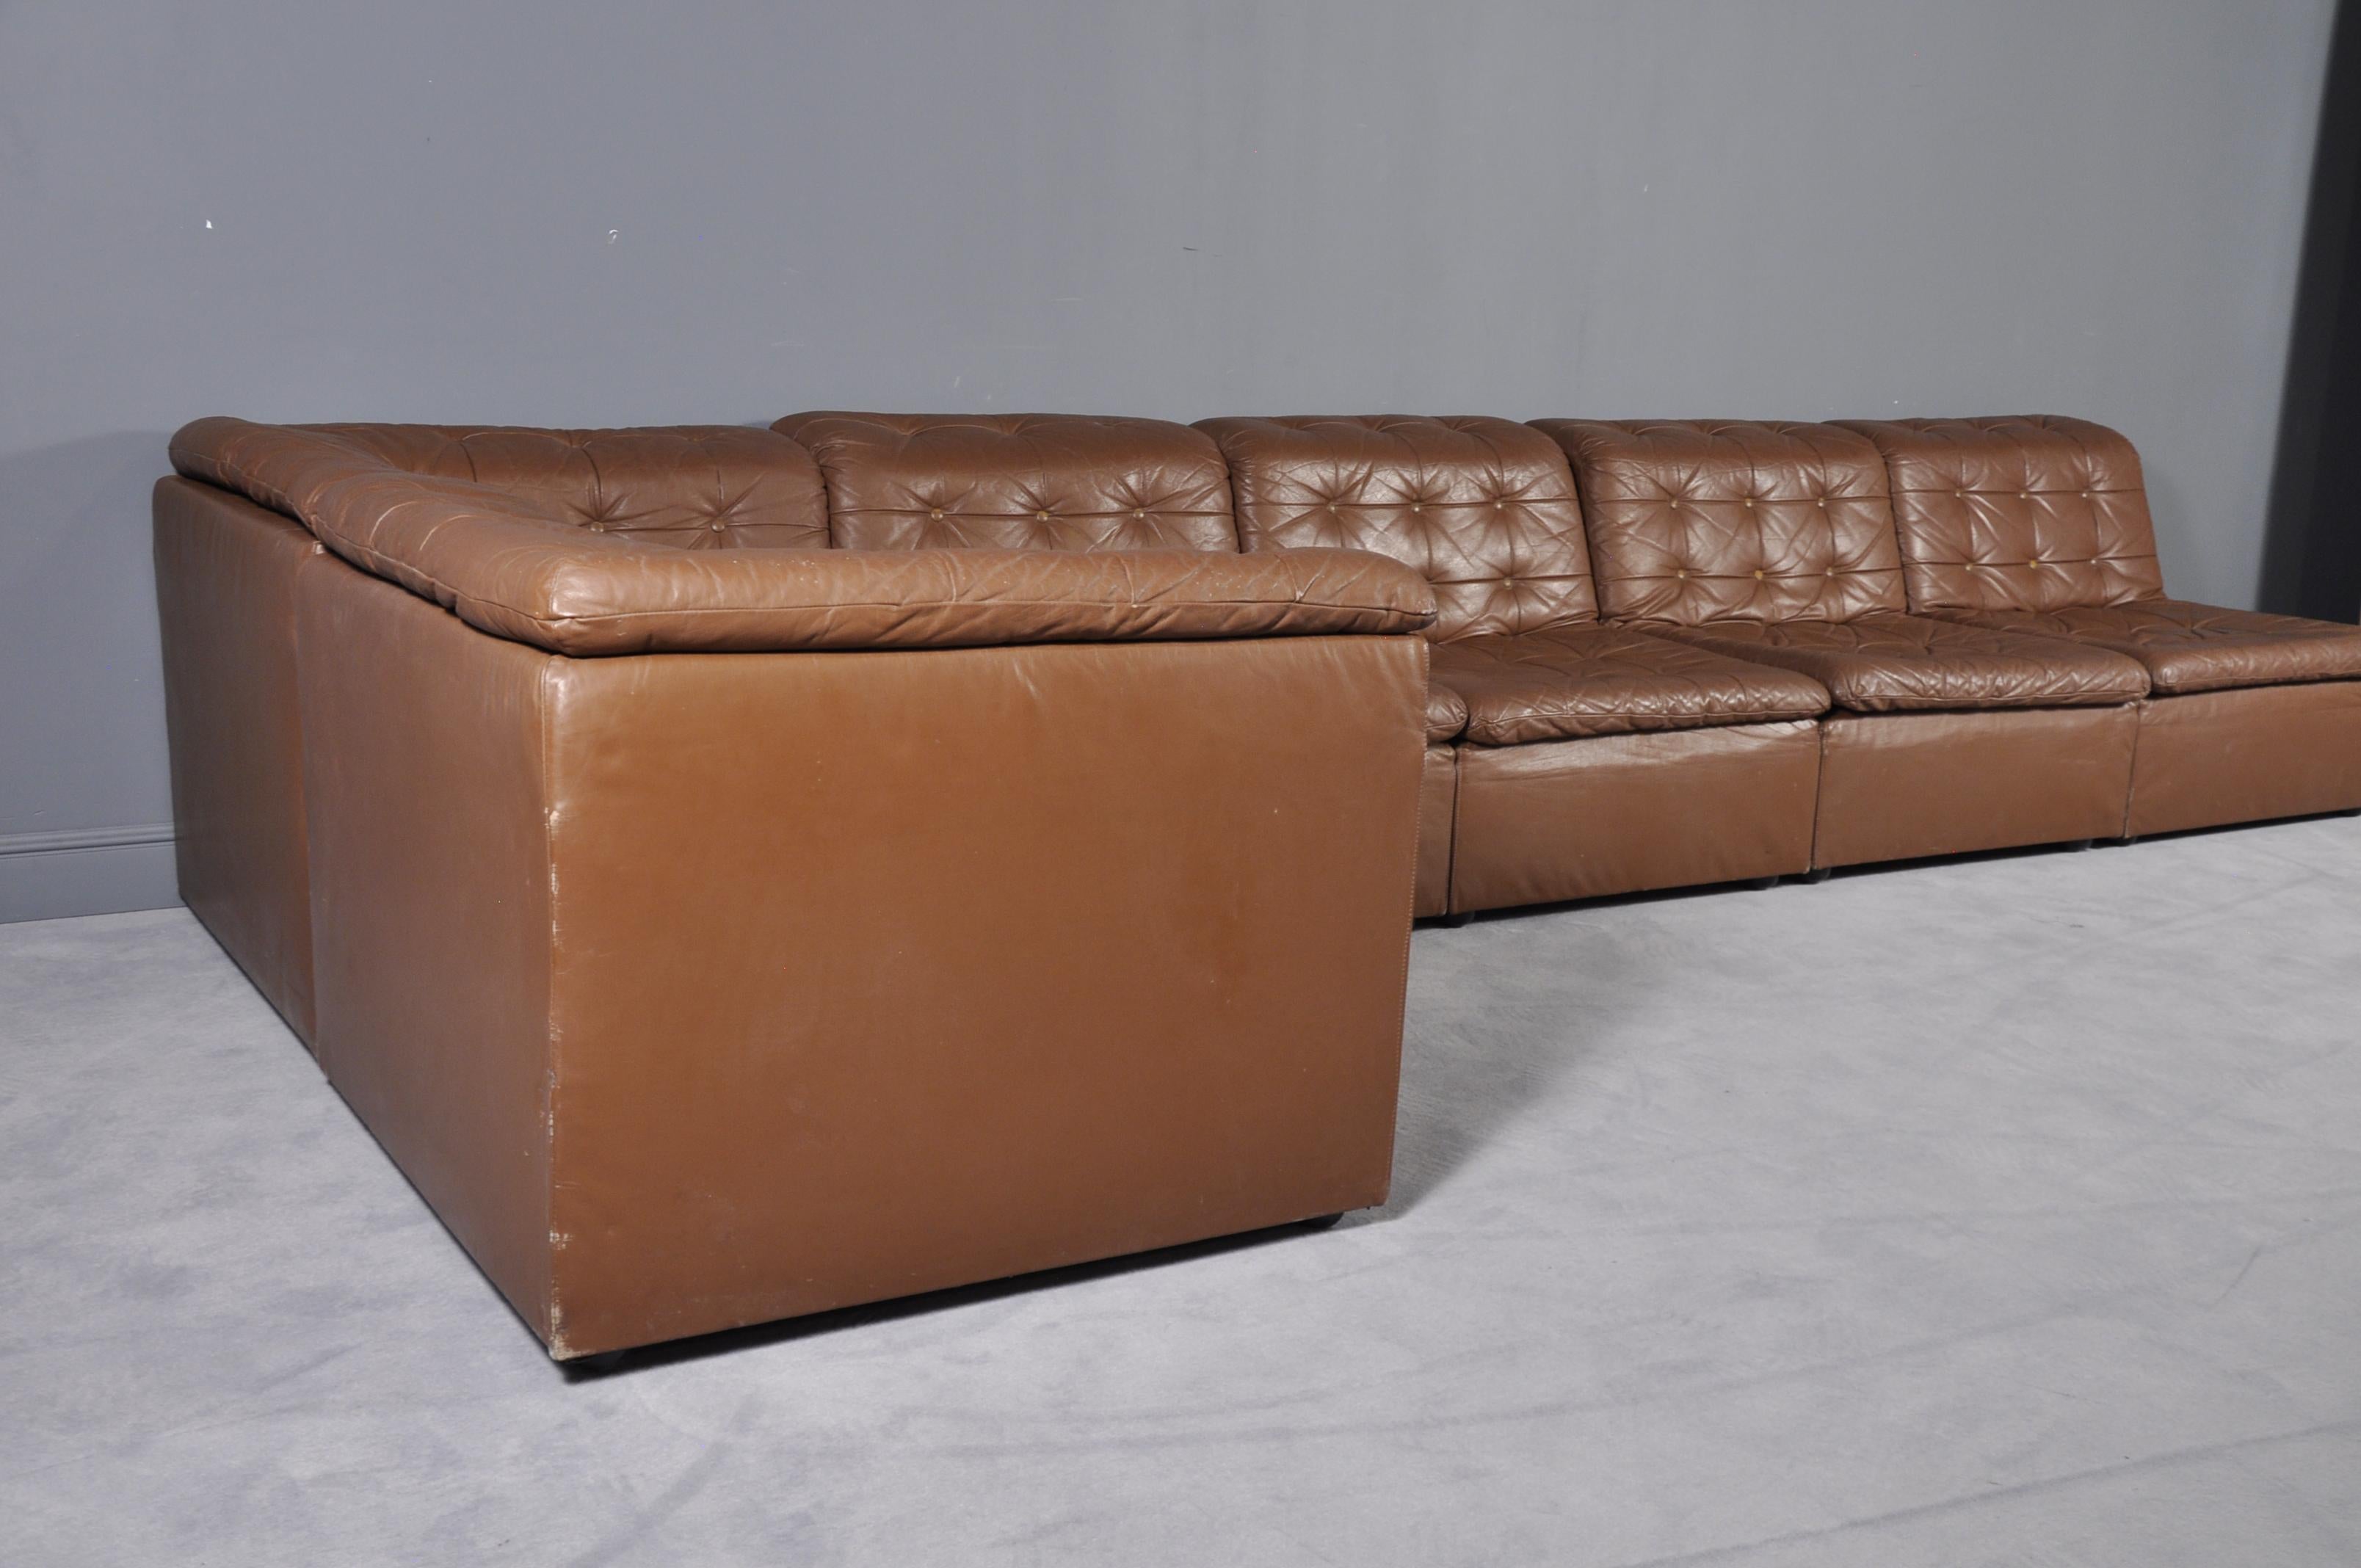 Cognac leather “De Sede Style” patchwork modular sofa from Laauser, Germany, 1970s.